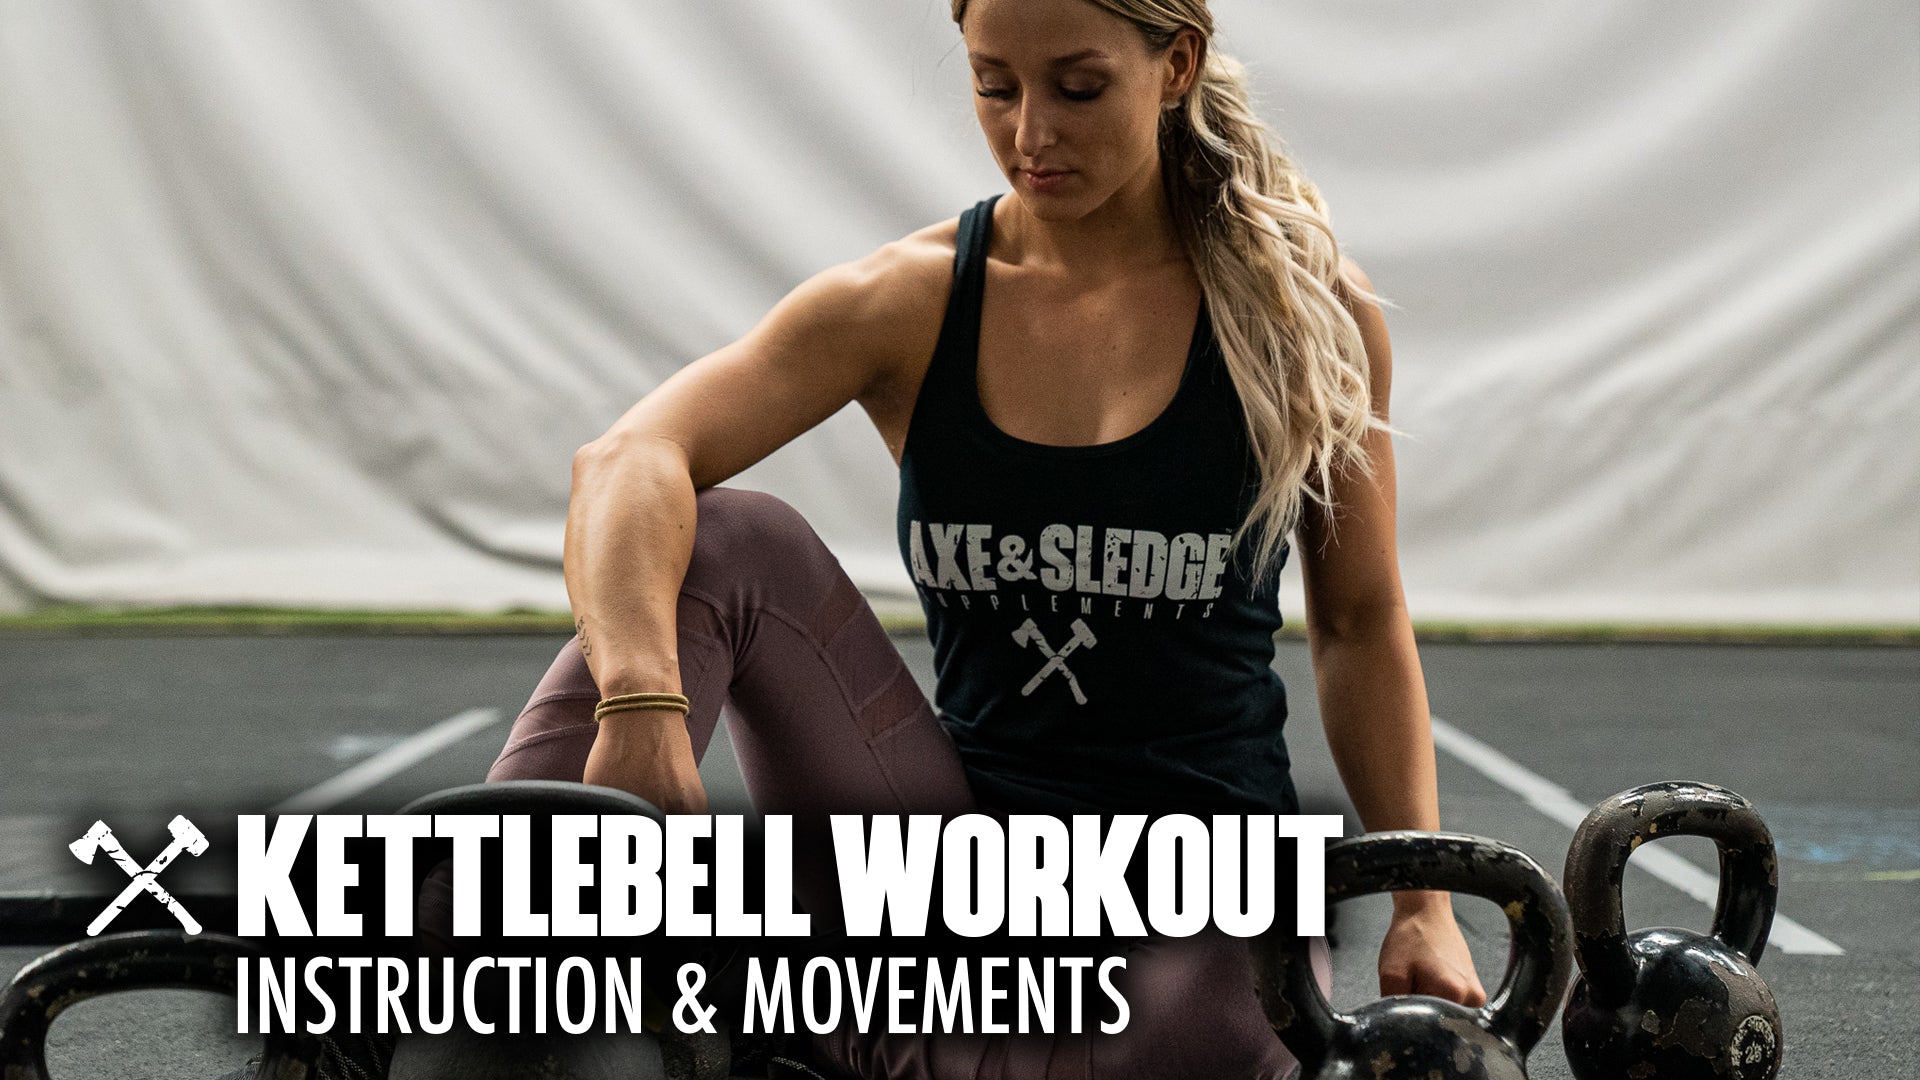 Kettlebell Workout with Krista Gia